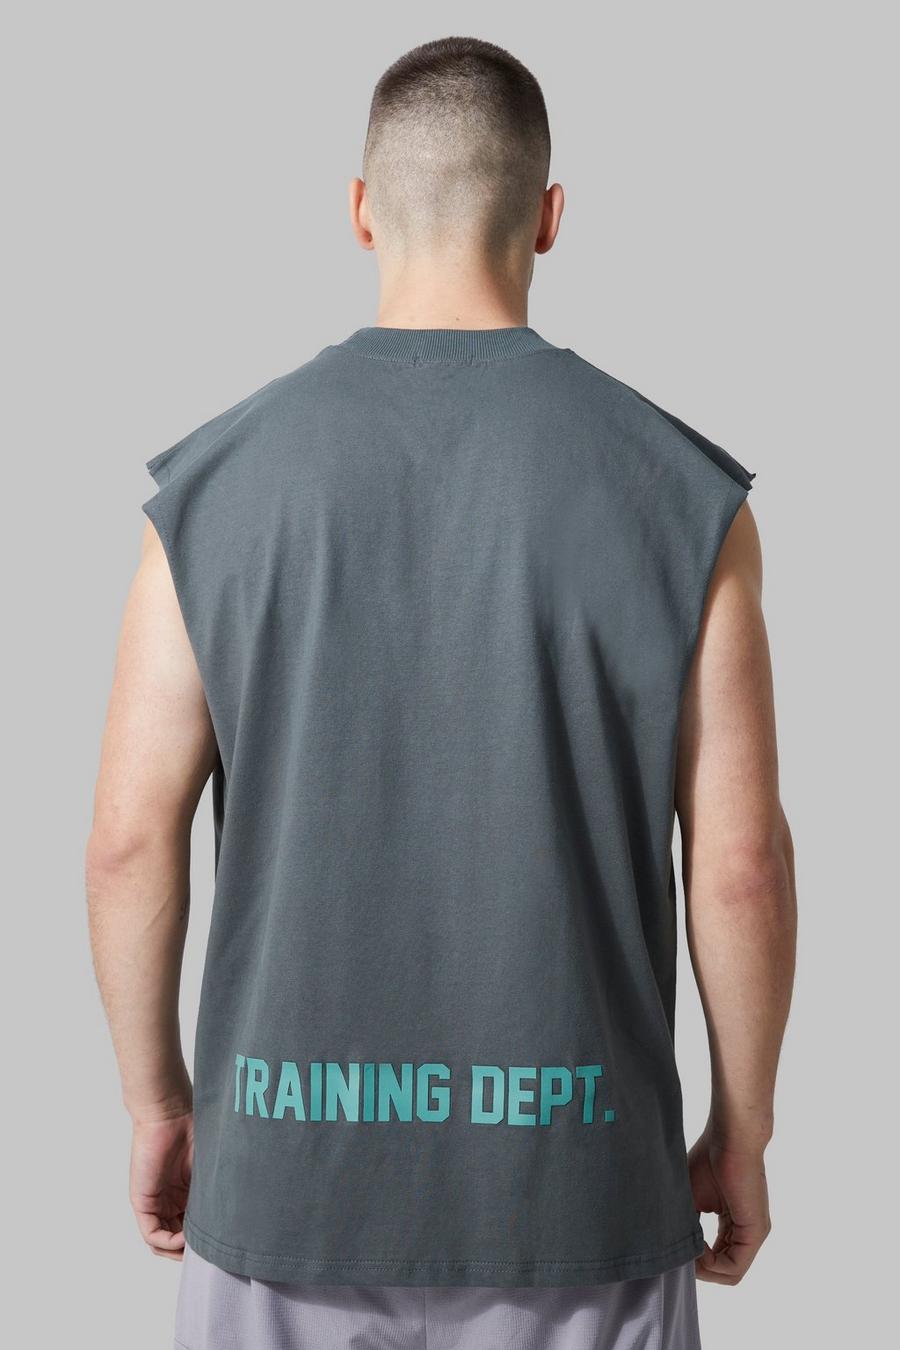 Charcoal gris Tall Oversized Active Training Dept Tank Top